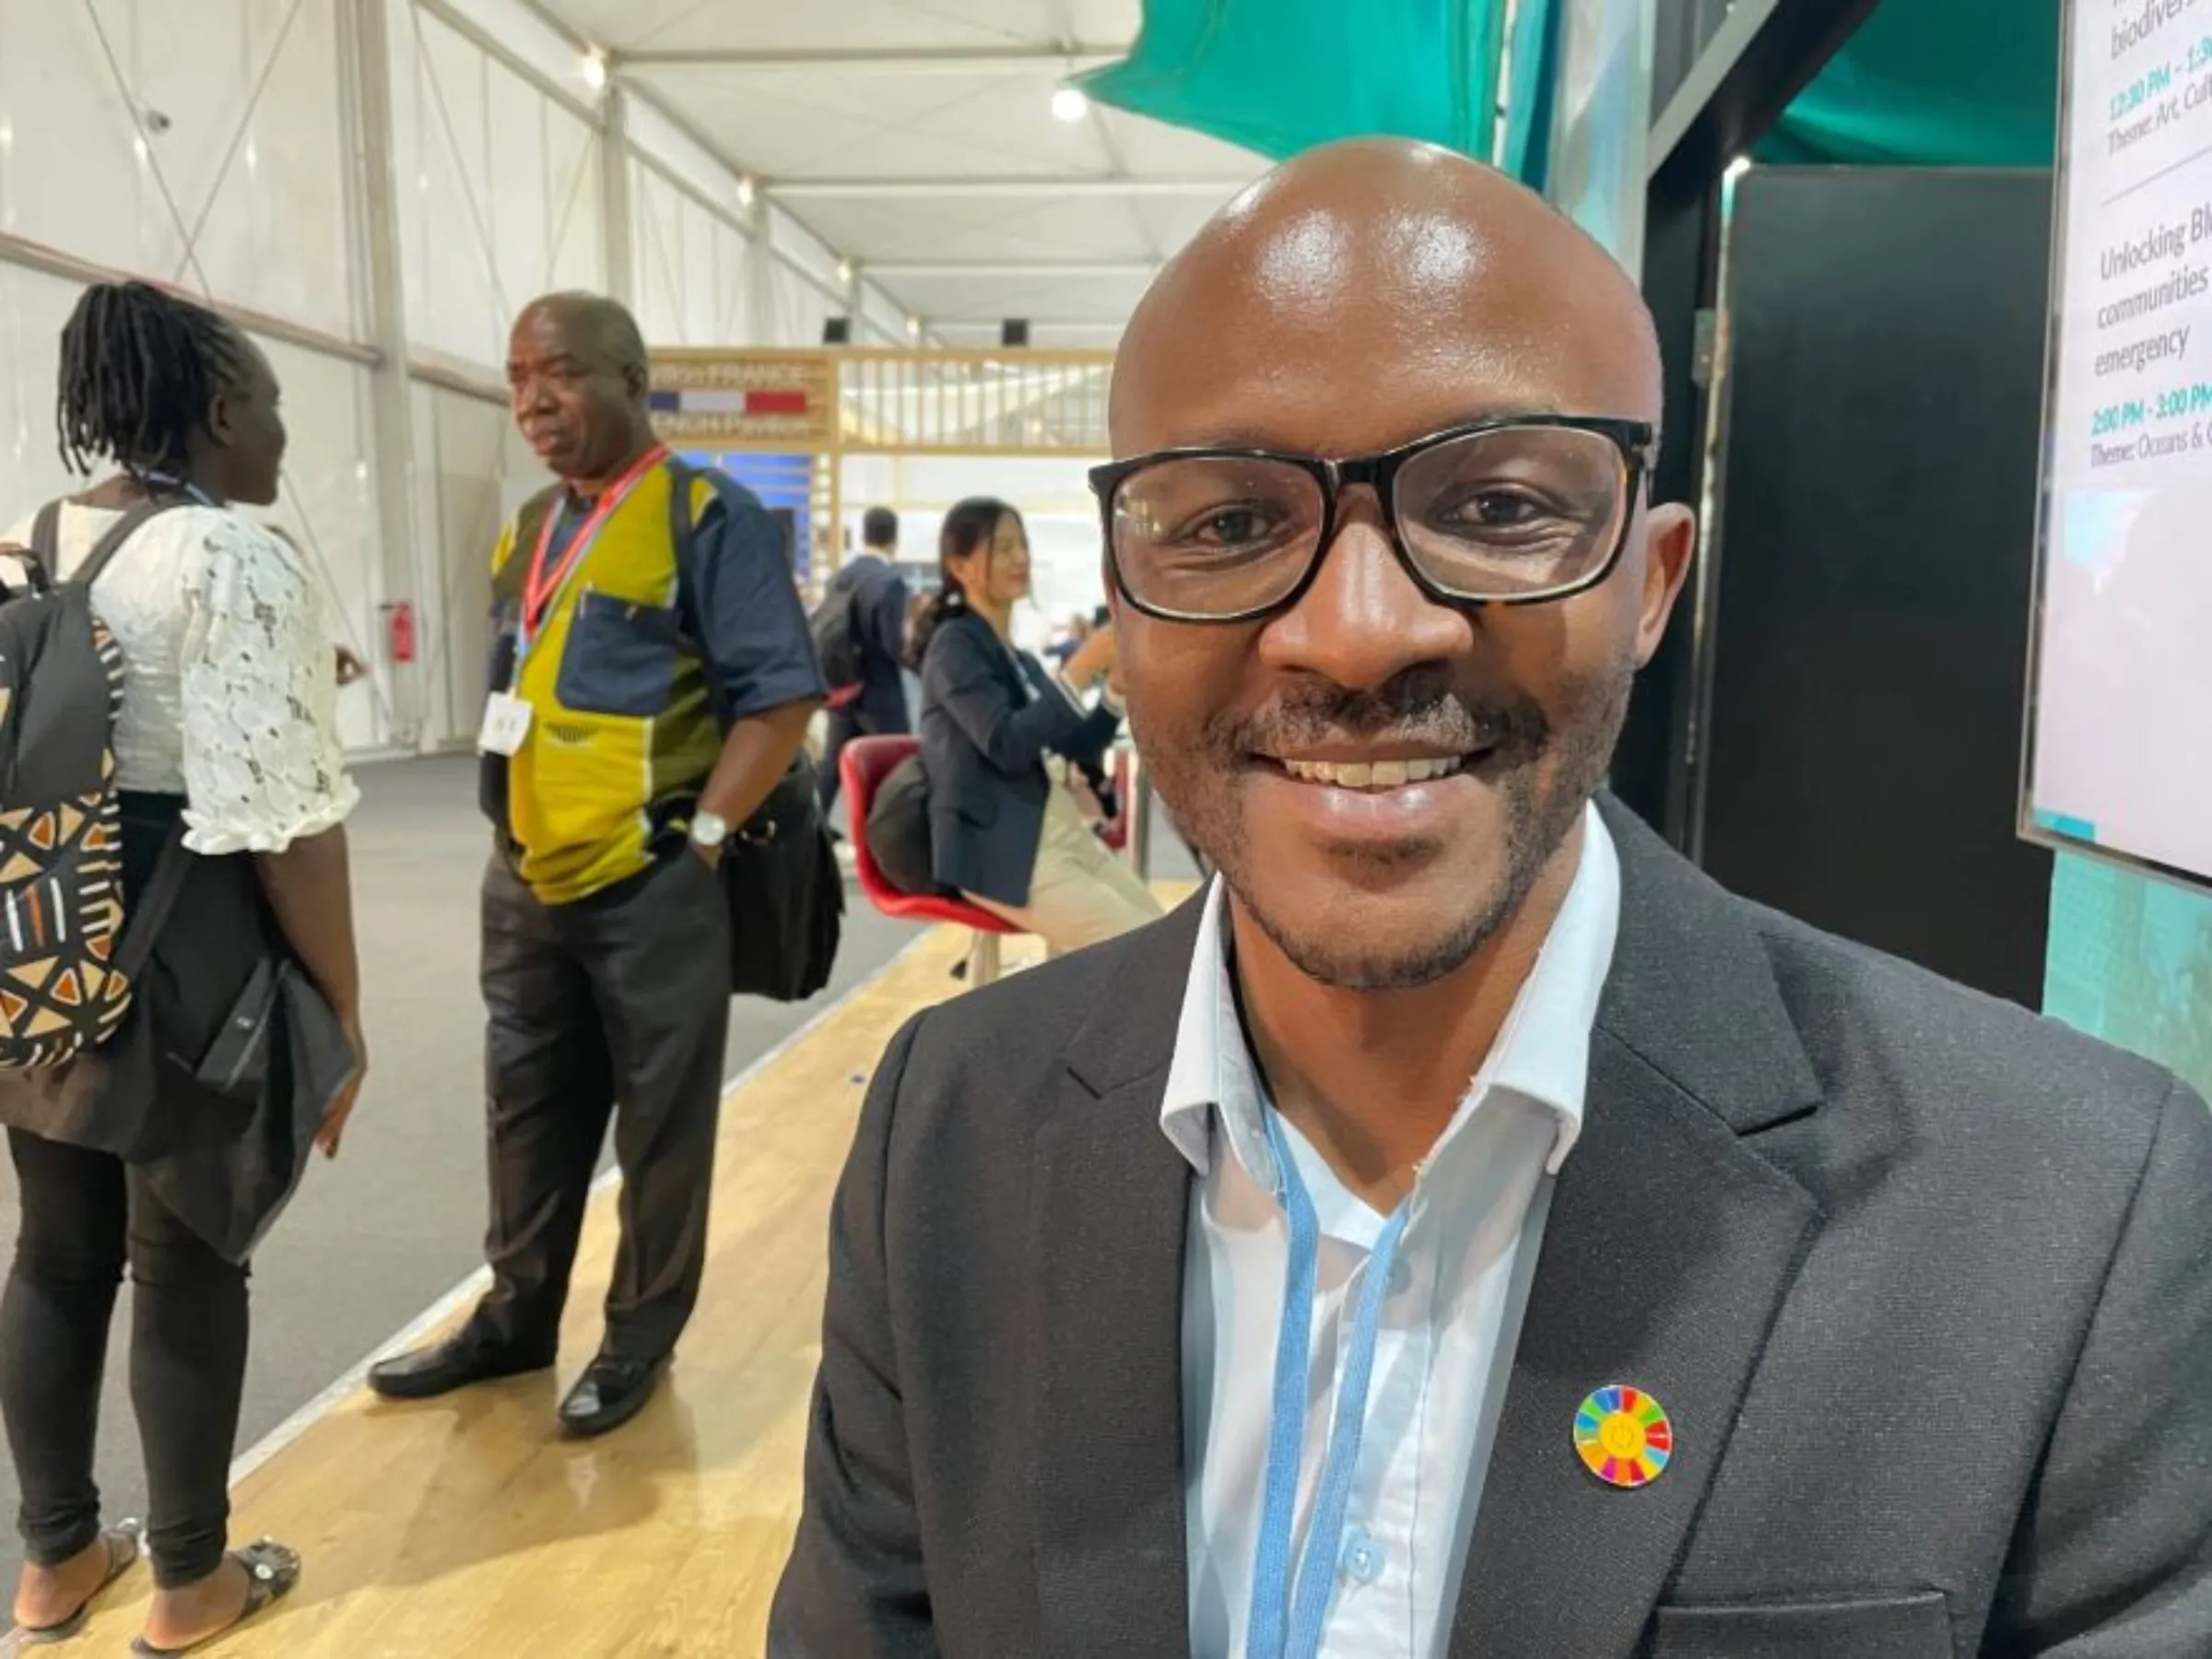 Innocent Tshilombo, an entrepreneur in Kenya's Kakuma refugee camp and himself a refugee from the Democratic Republic of Congo, poses for a photo at the COP27 U.N. climate talks in Sharm El-Sheikh, Egypt, November 16, 2022